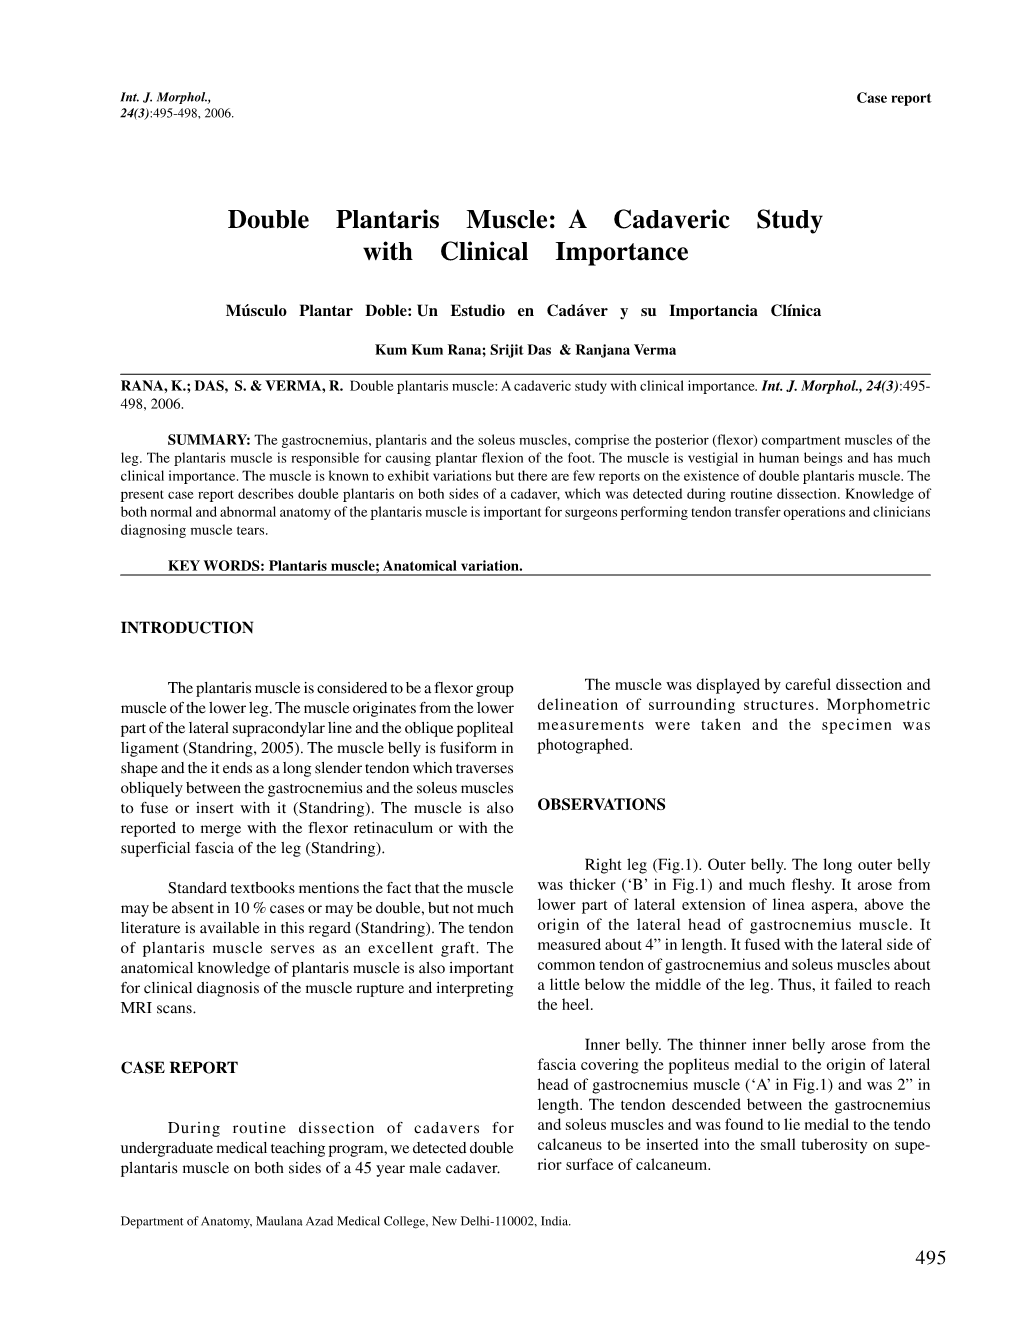 Double Plantaris Muscle: a Cadaveric Study with Clinical Importance